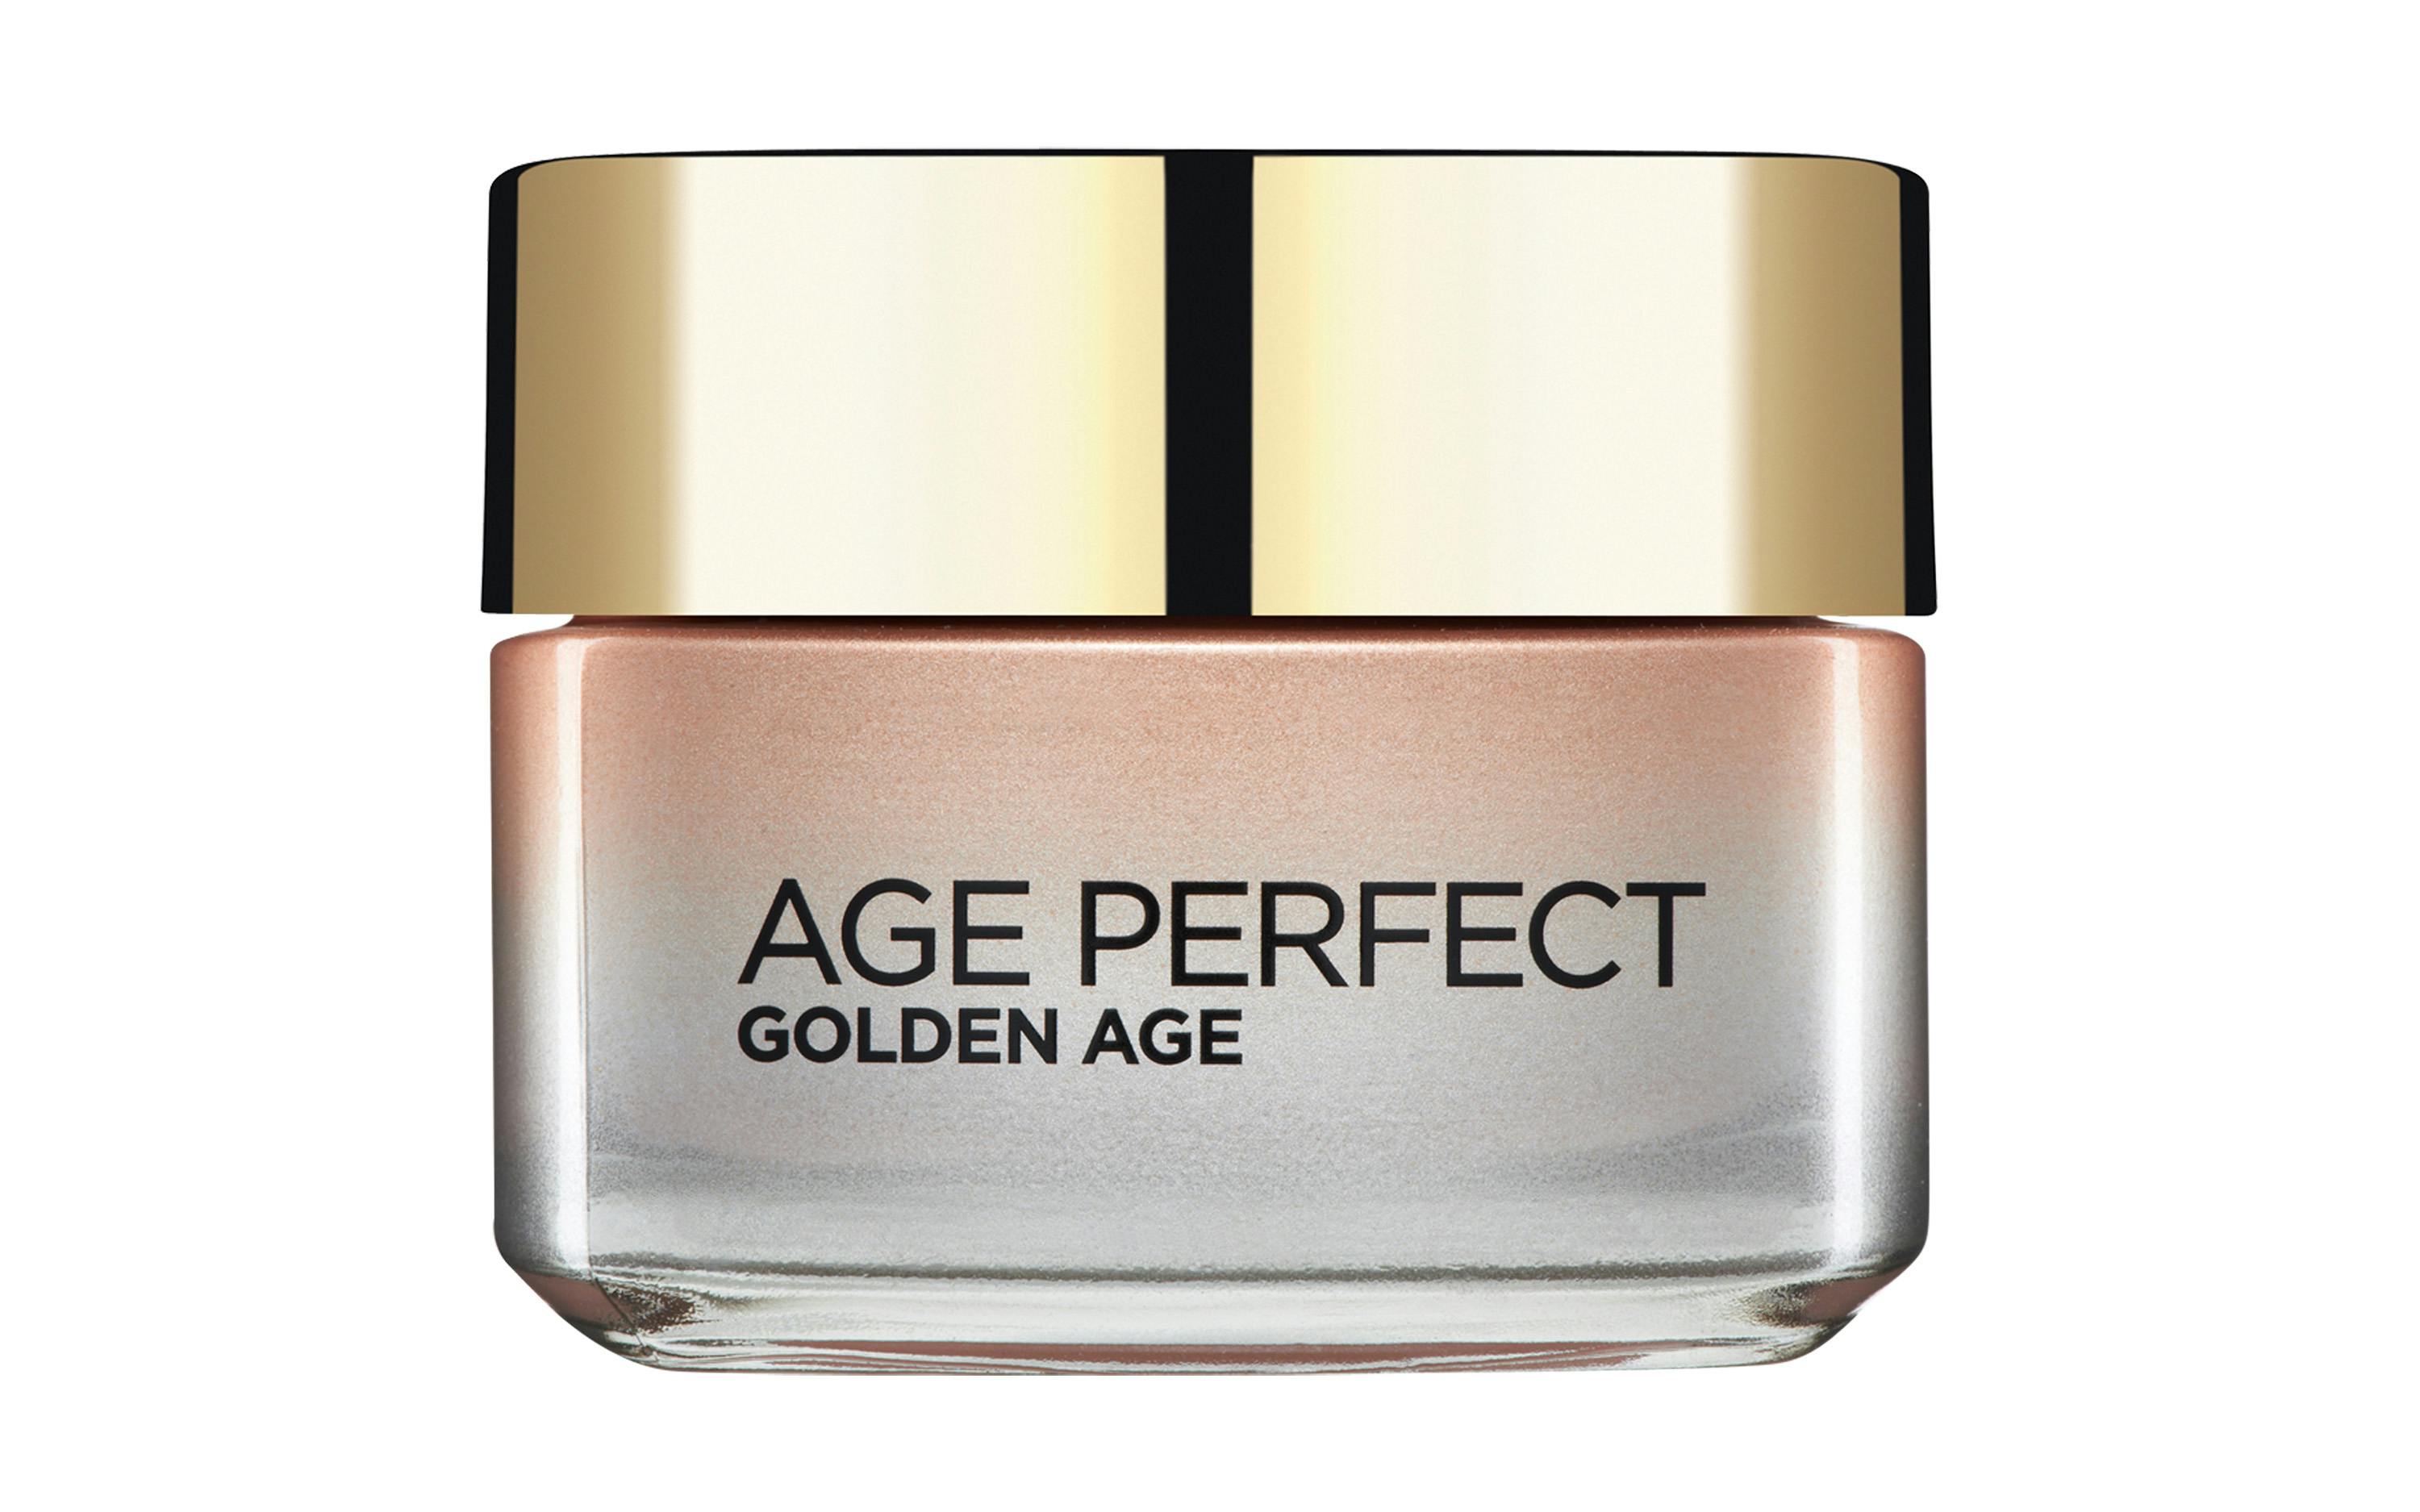 Age Perfect Golden Age Rosy creme